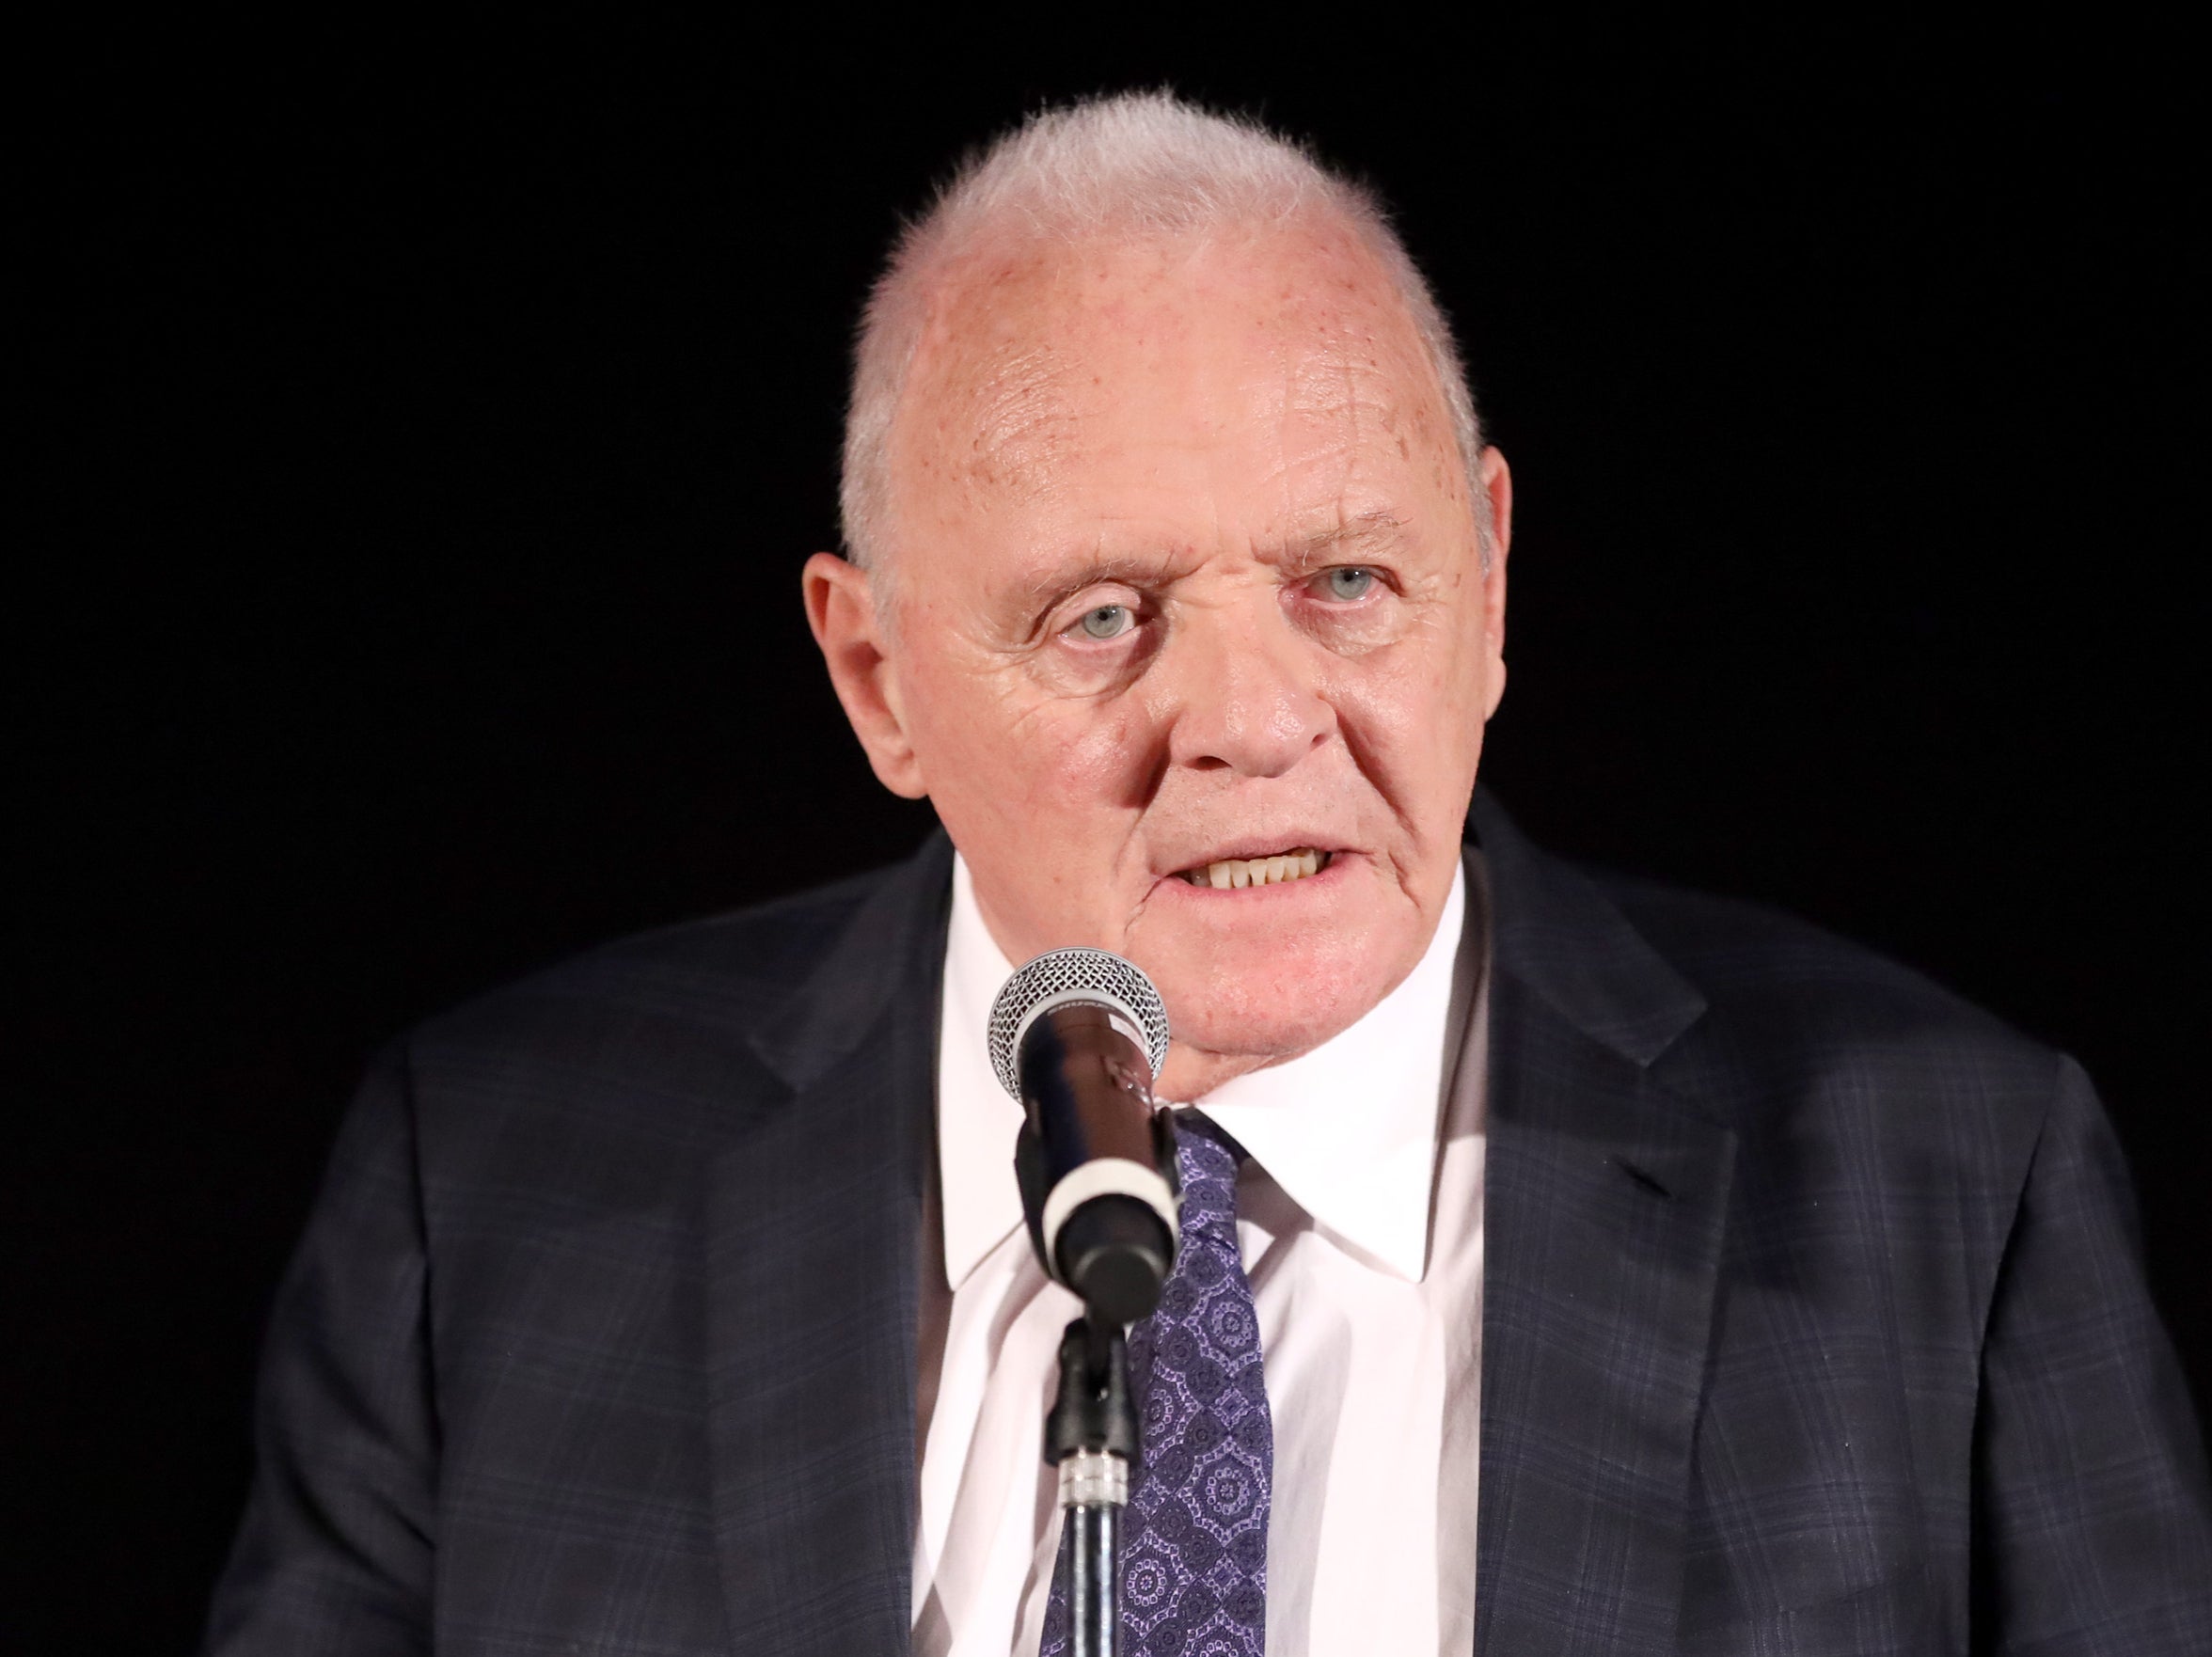 Anthony Hopkins picked up his second Oscar for ‘The Father’, beating the late Chadwick Boseman in a shock victory in 2021